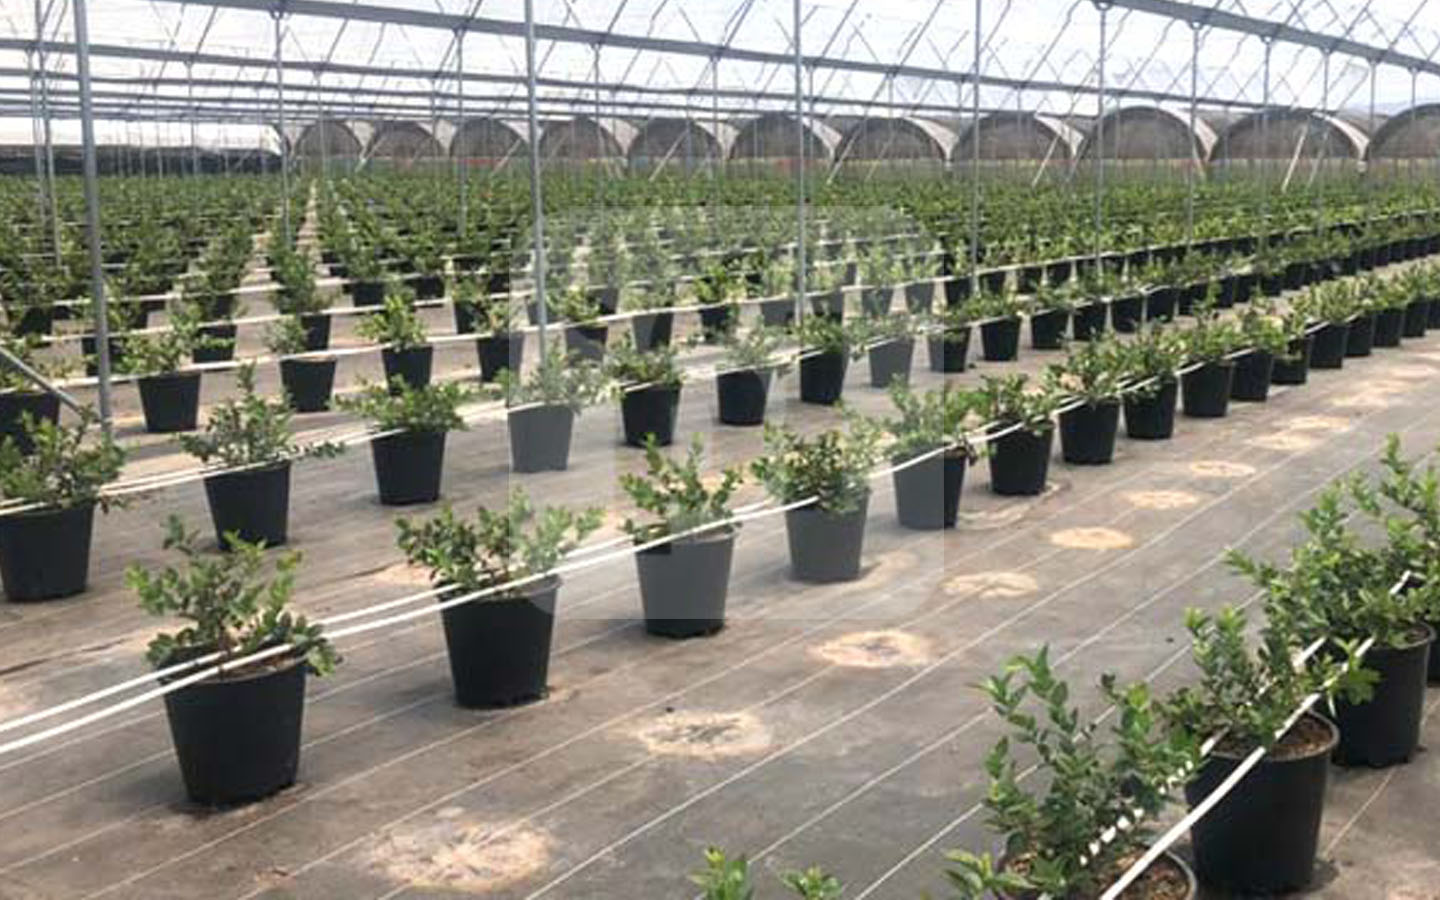 Blueberry Season: Top 10 key requirements for growing blueberries in containers